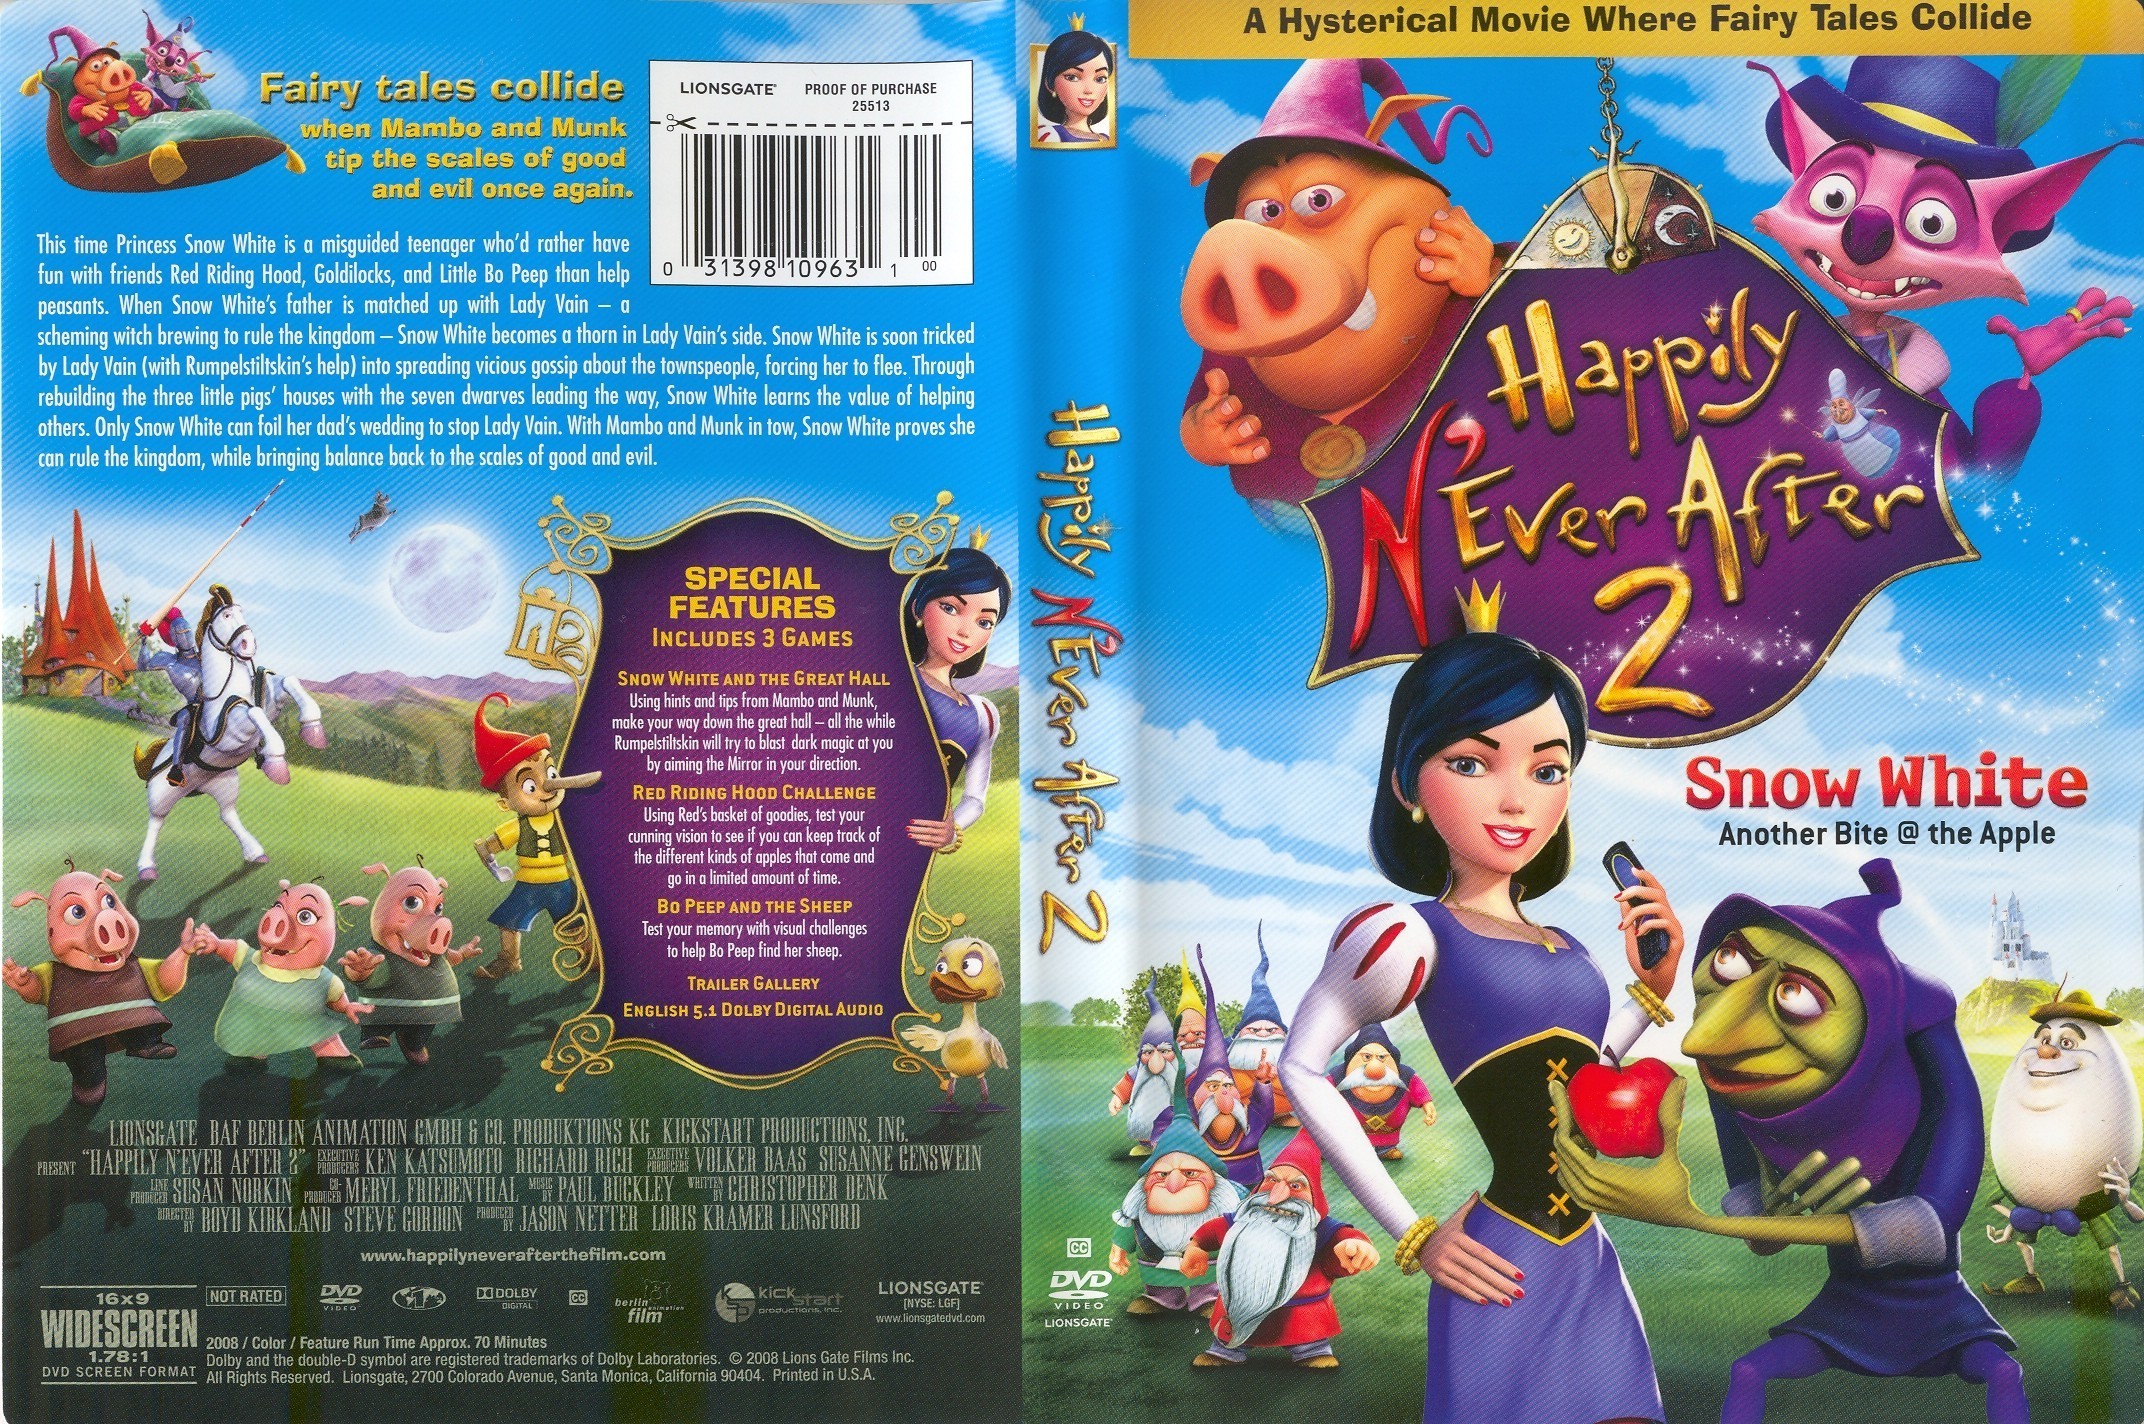 Happily N'ever After 2 DVD